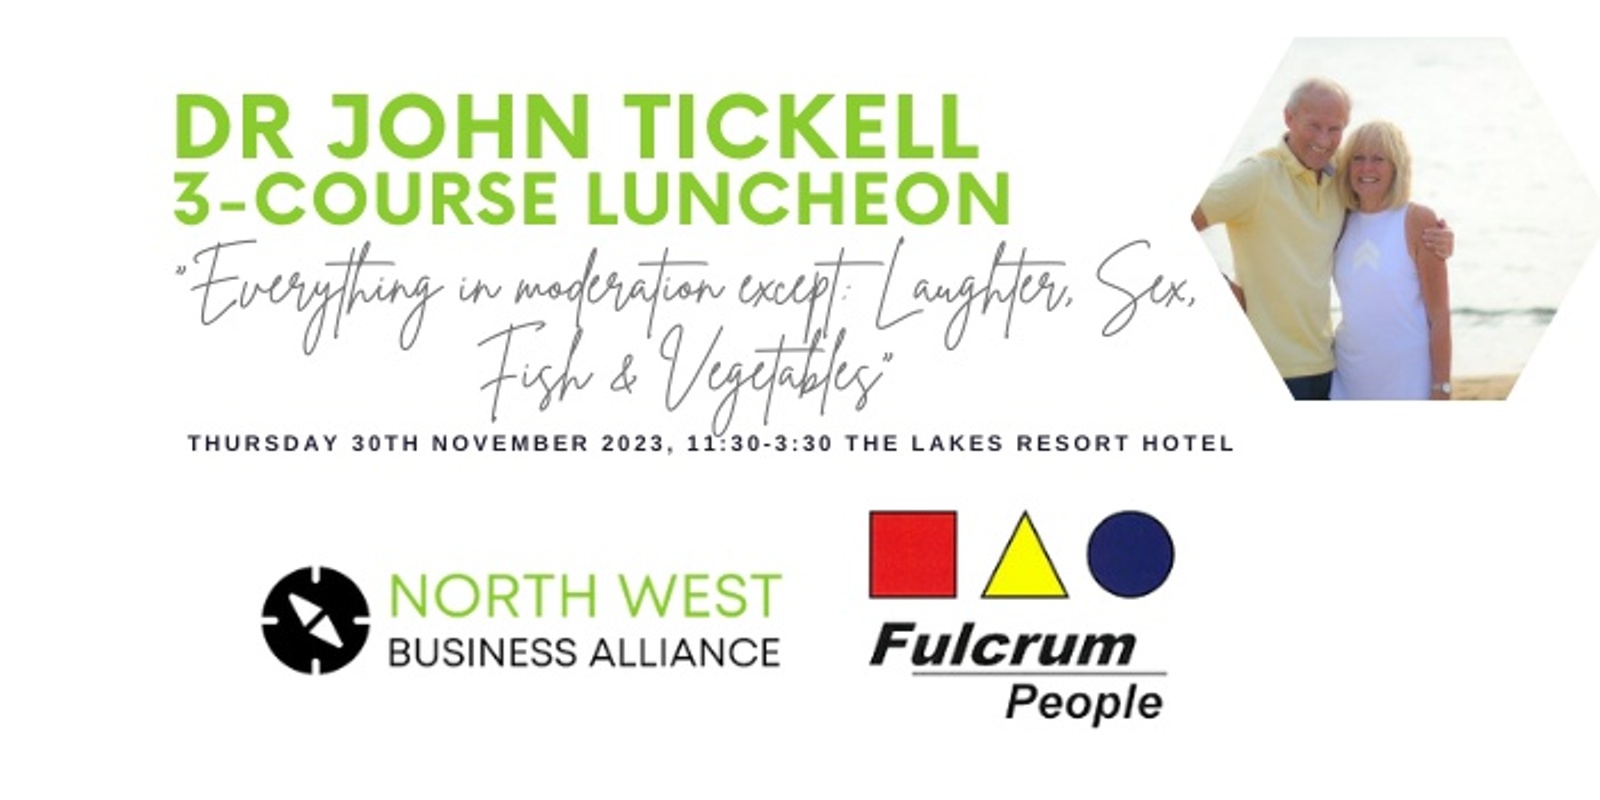 Banner image for World renowned speaker: Dr John Tickell 3-course Luncheon - "Everything in moderation except Laughter, Sex, Fish & Vegetables"